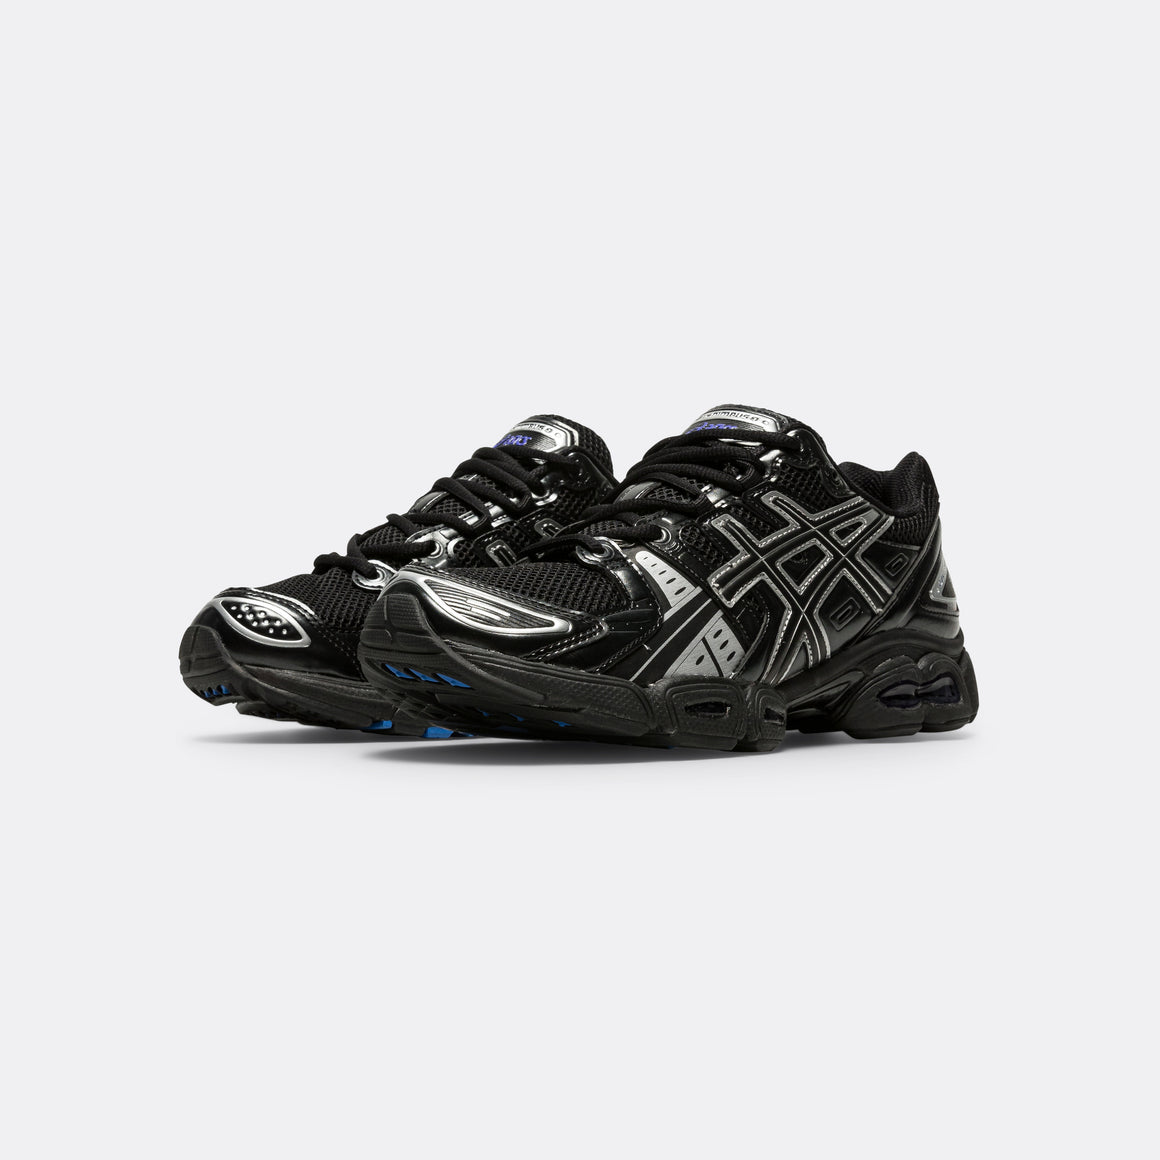 Asics - GEL-Nimbus 9 - Black/Pure Silver - UP THERE